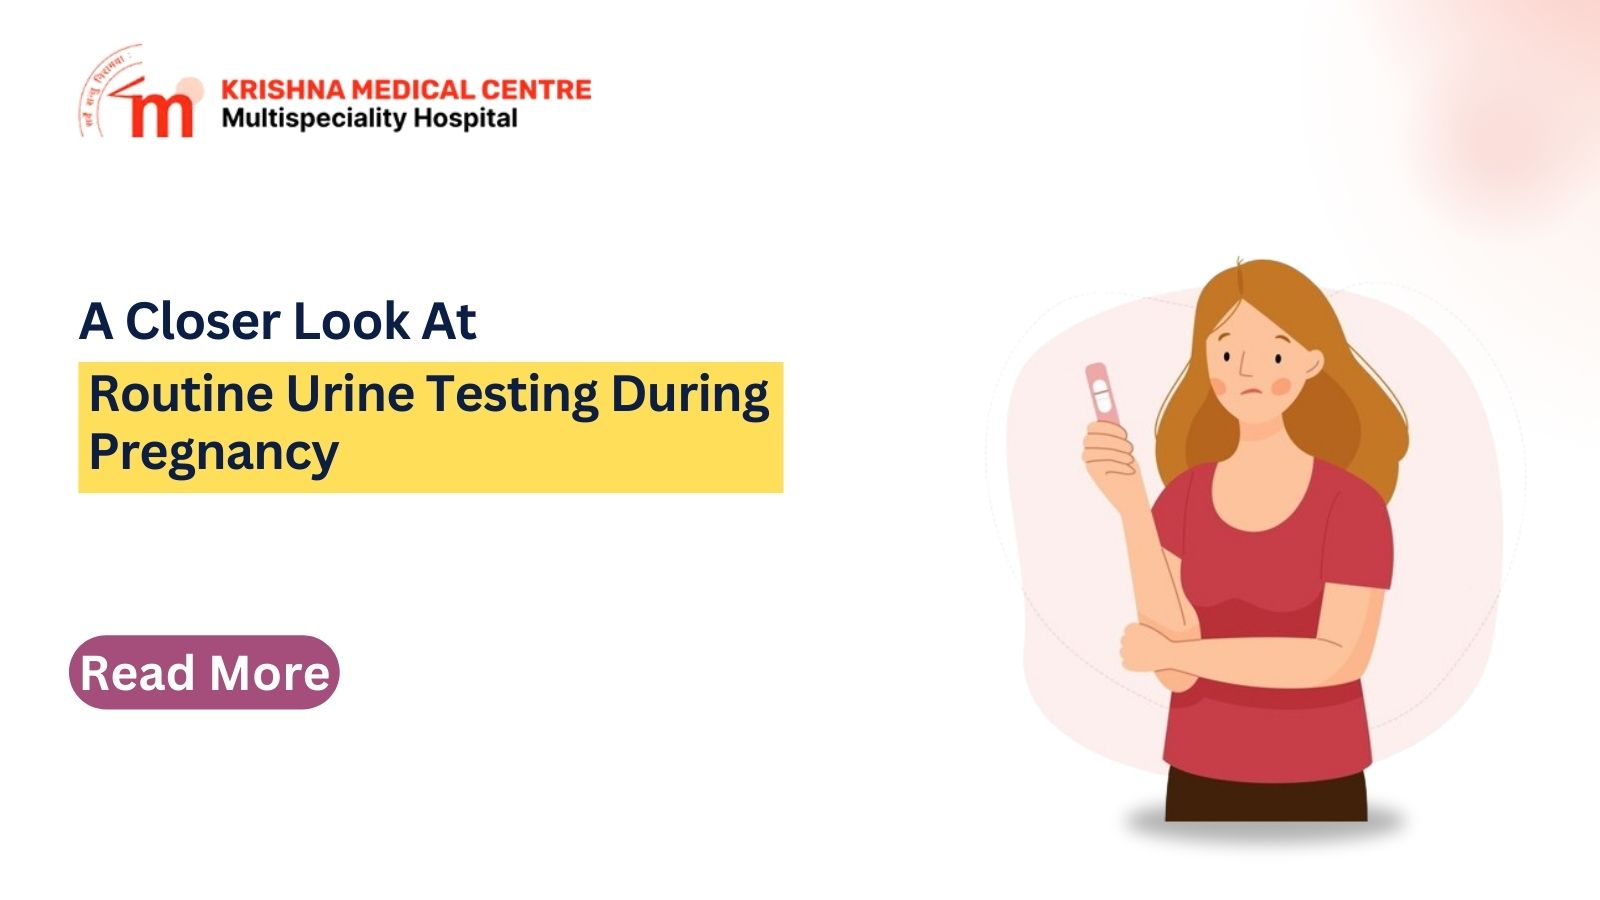 What routine tests are done in pregnancy